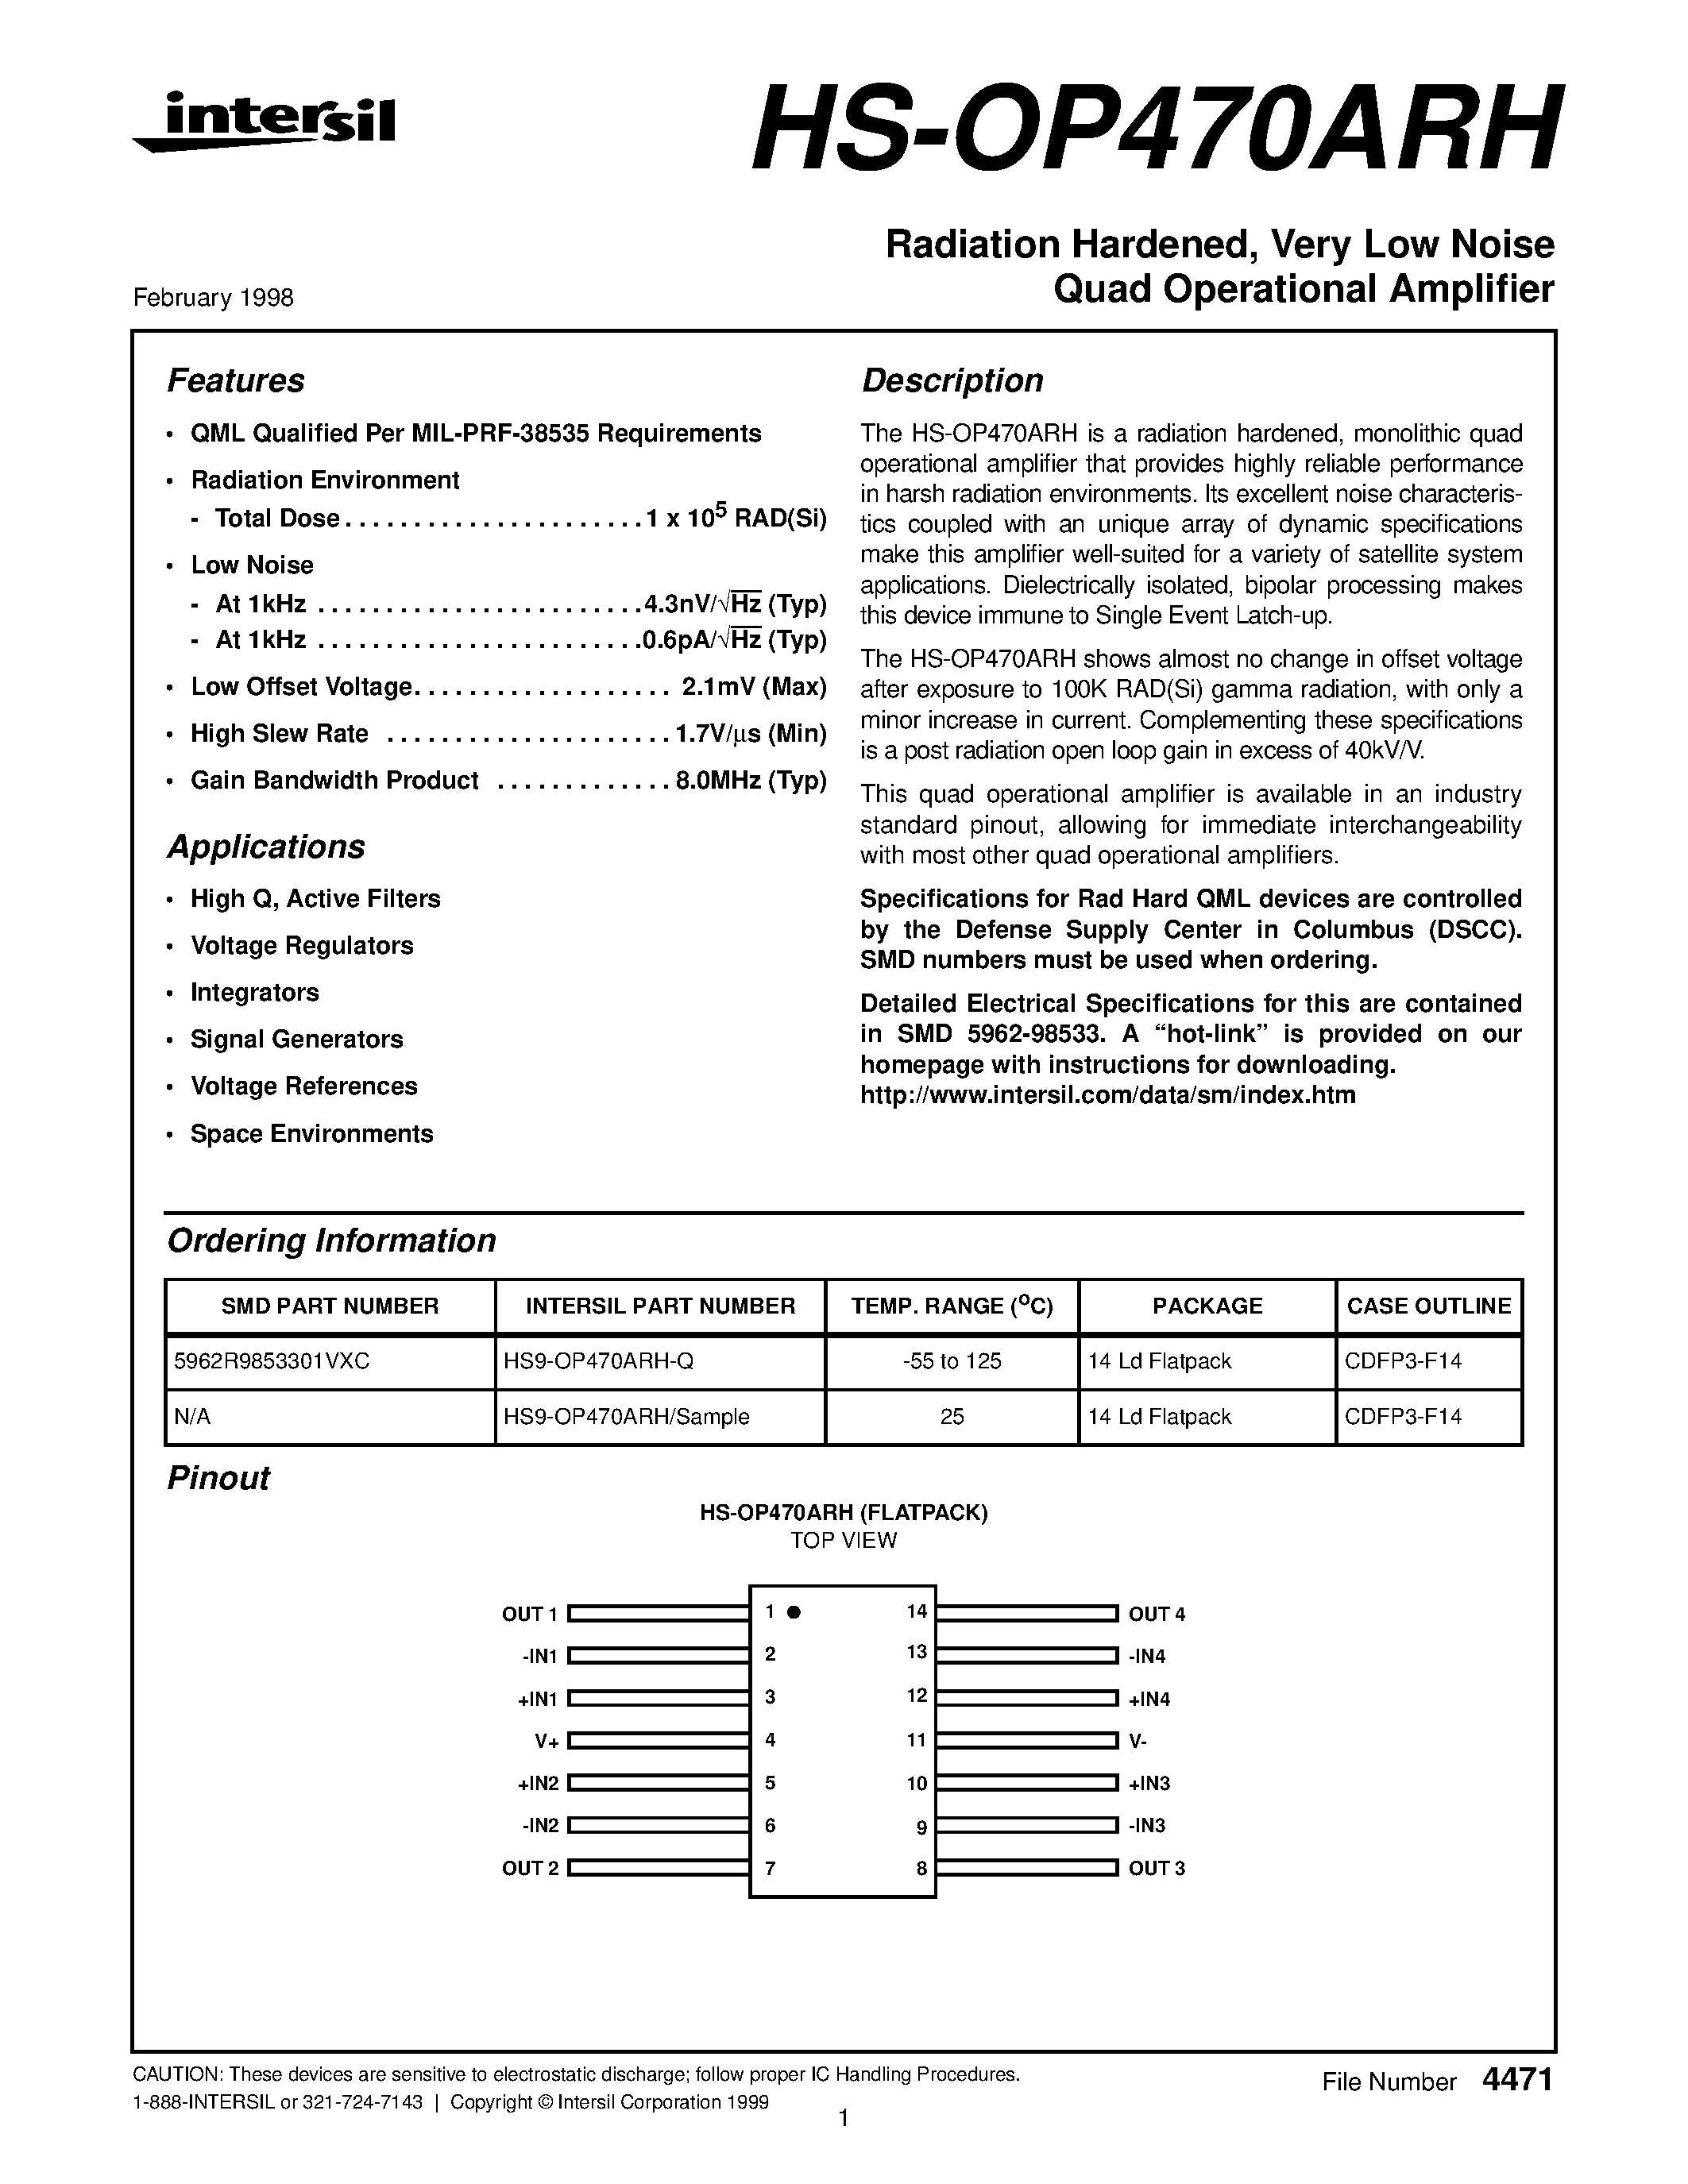 Datasheet HS9-OP470ARH-Q - Radiation Hardened/ Very Low Noise Quad Operational Amplifier page 1